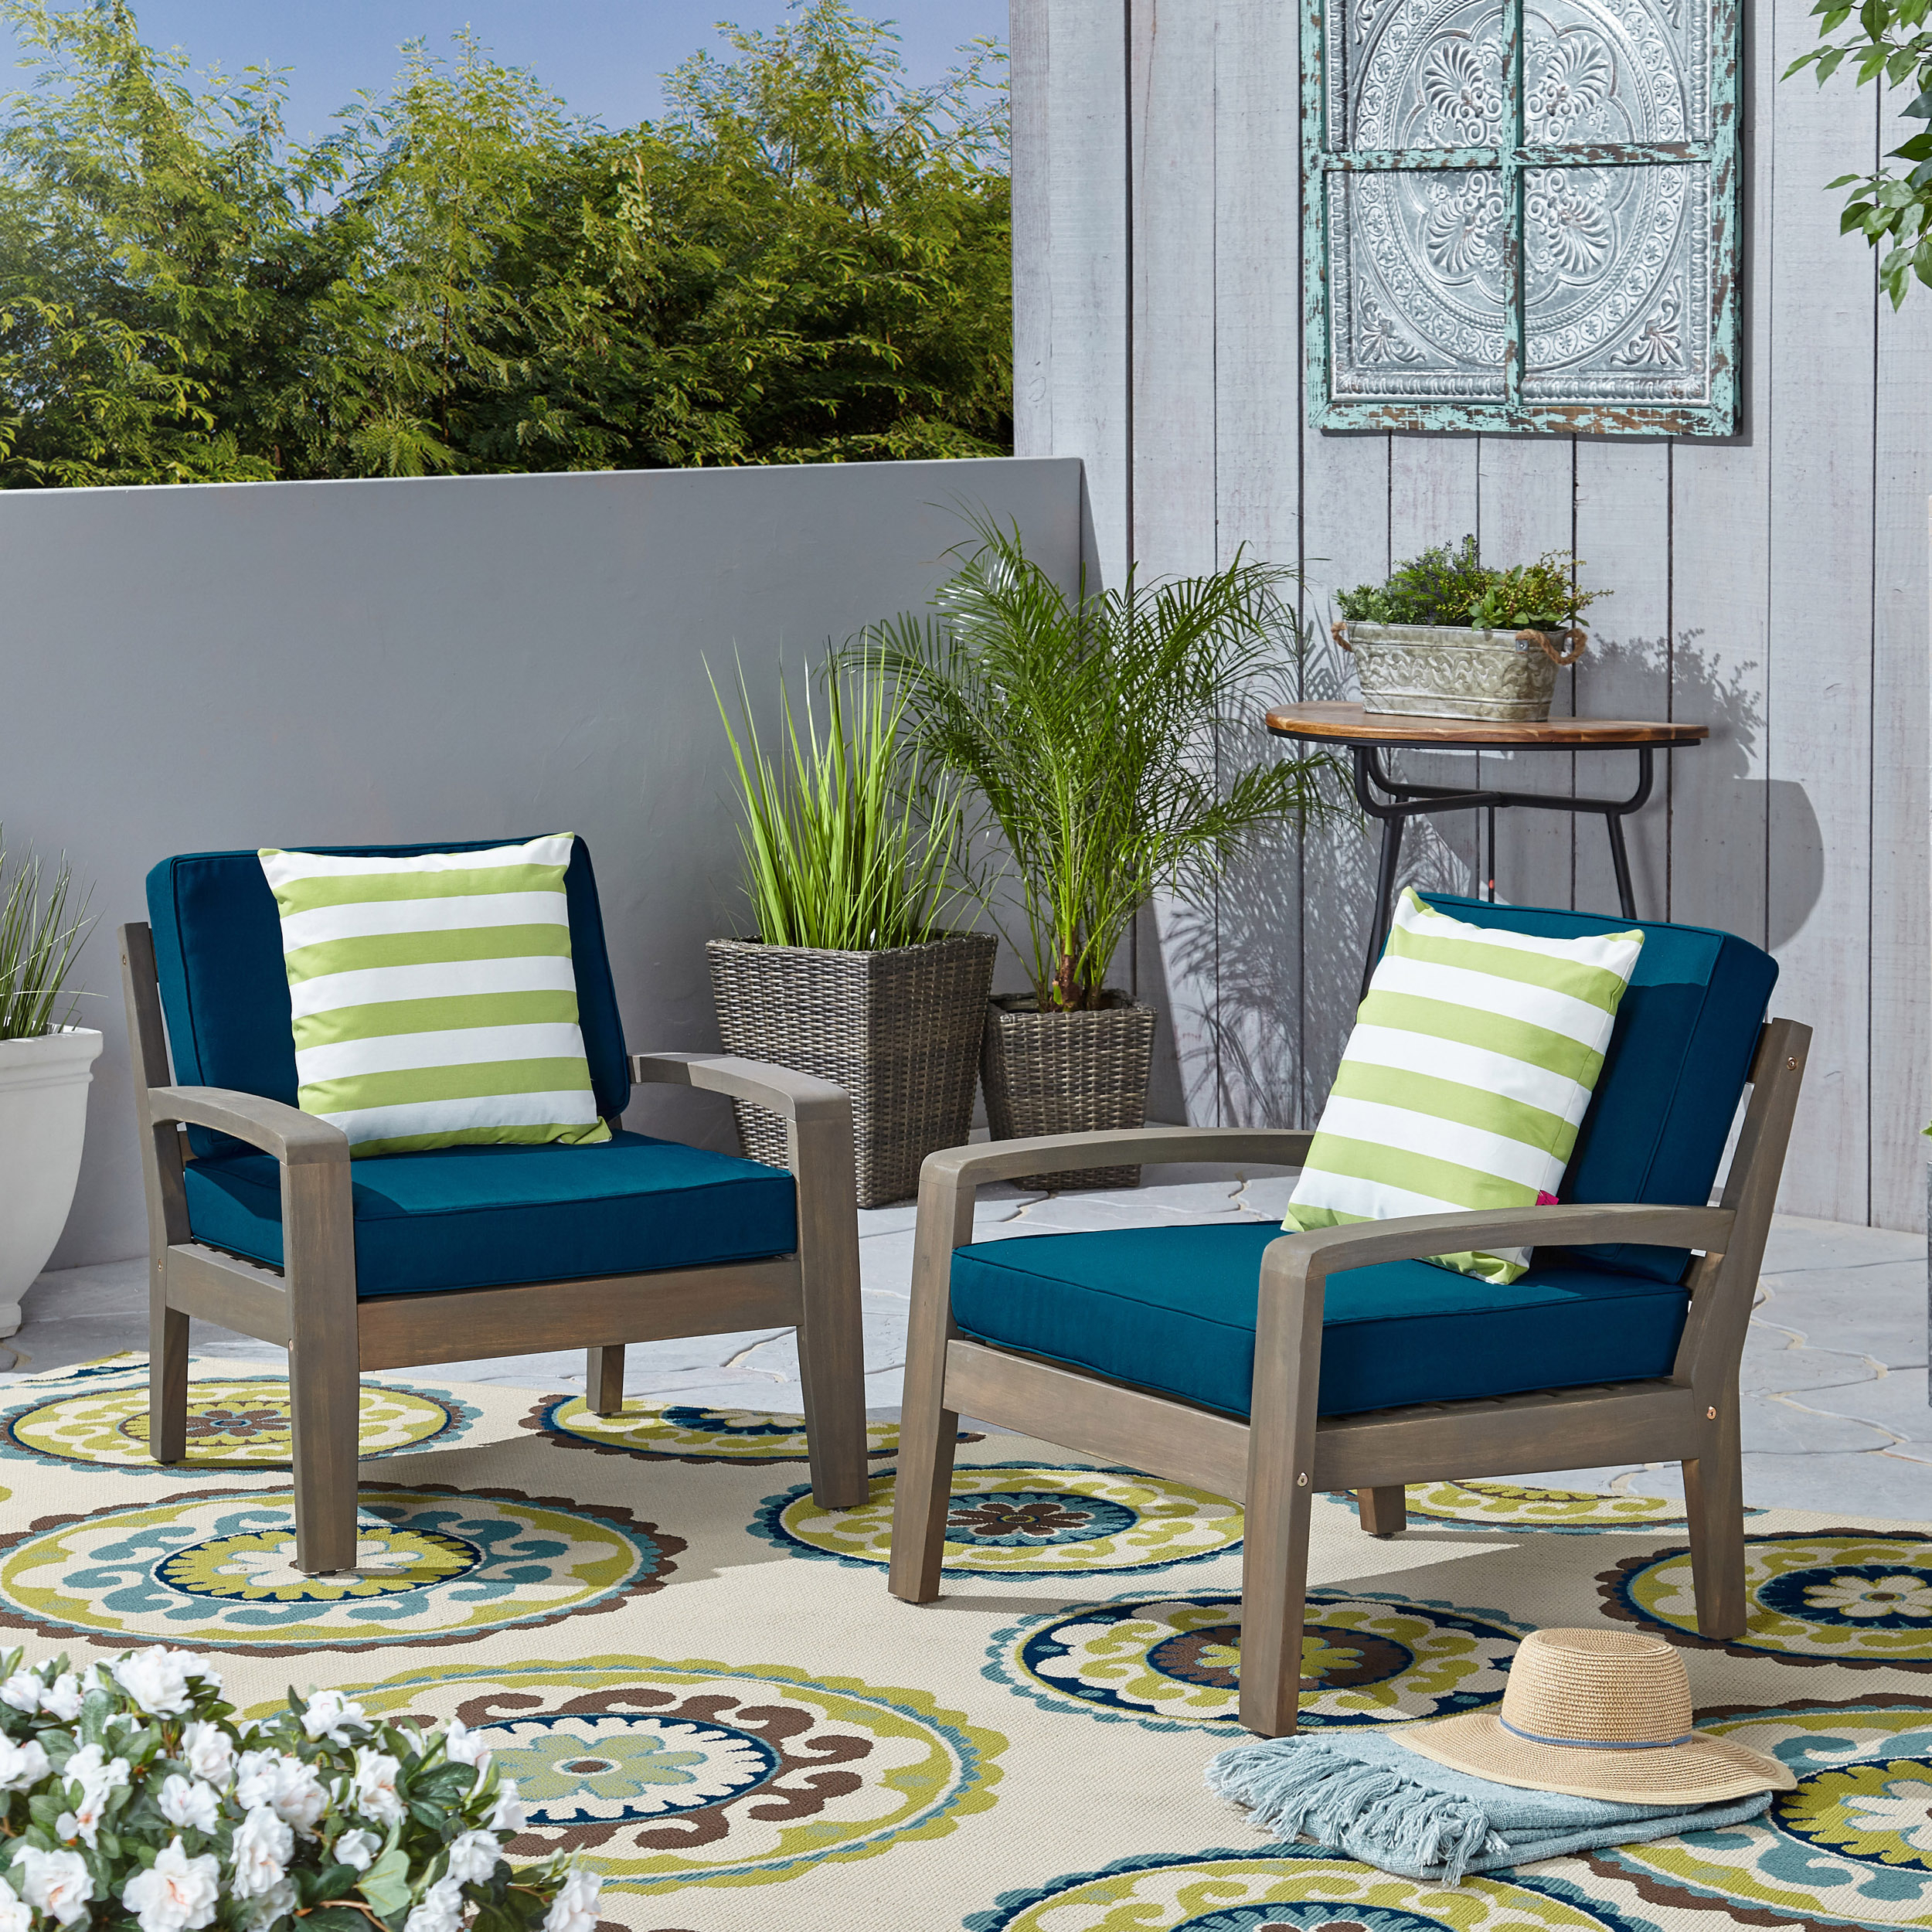 Giselle Outdoor Acacia Wood Club Chairs With Sunbrella Cushions - Gray, Set Of 4